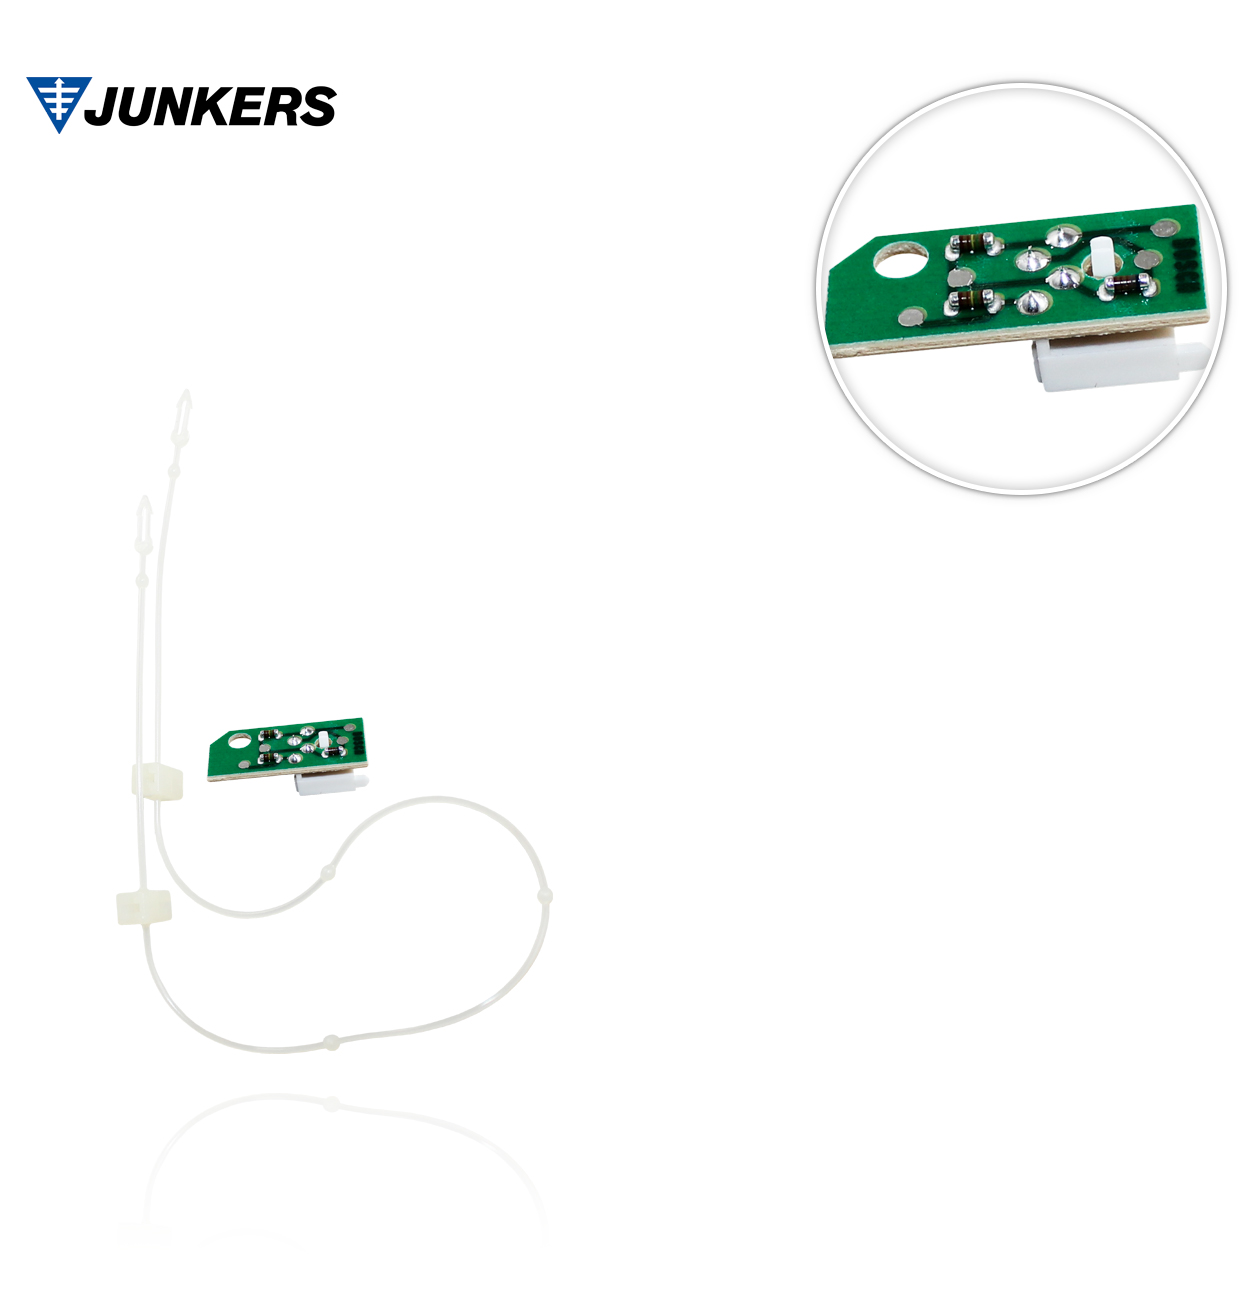 KIT CONVERSION GAS GLP-NATURAL  31 -> 23 ZWBC25 JUNKERS 8716013083